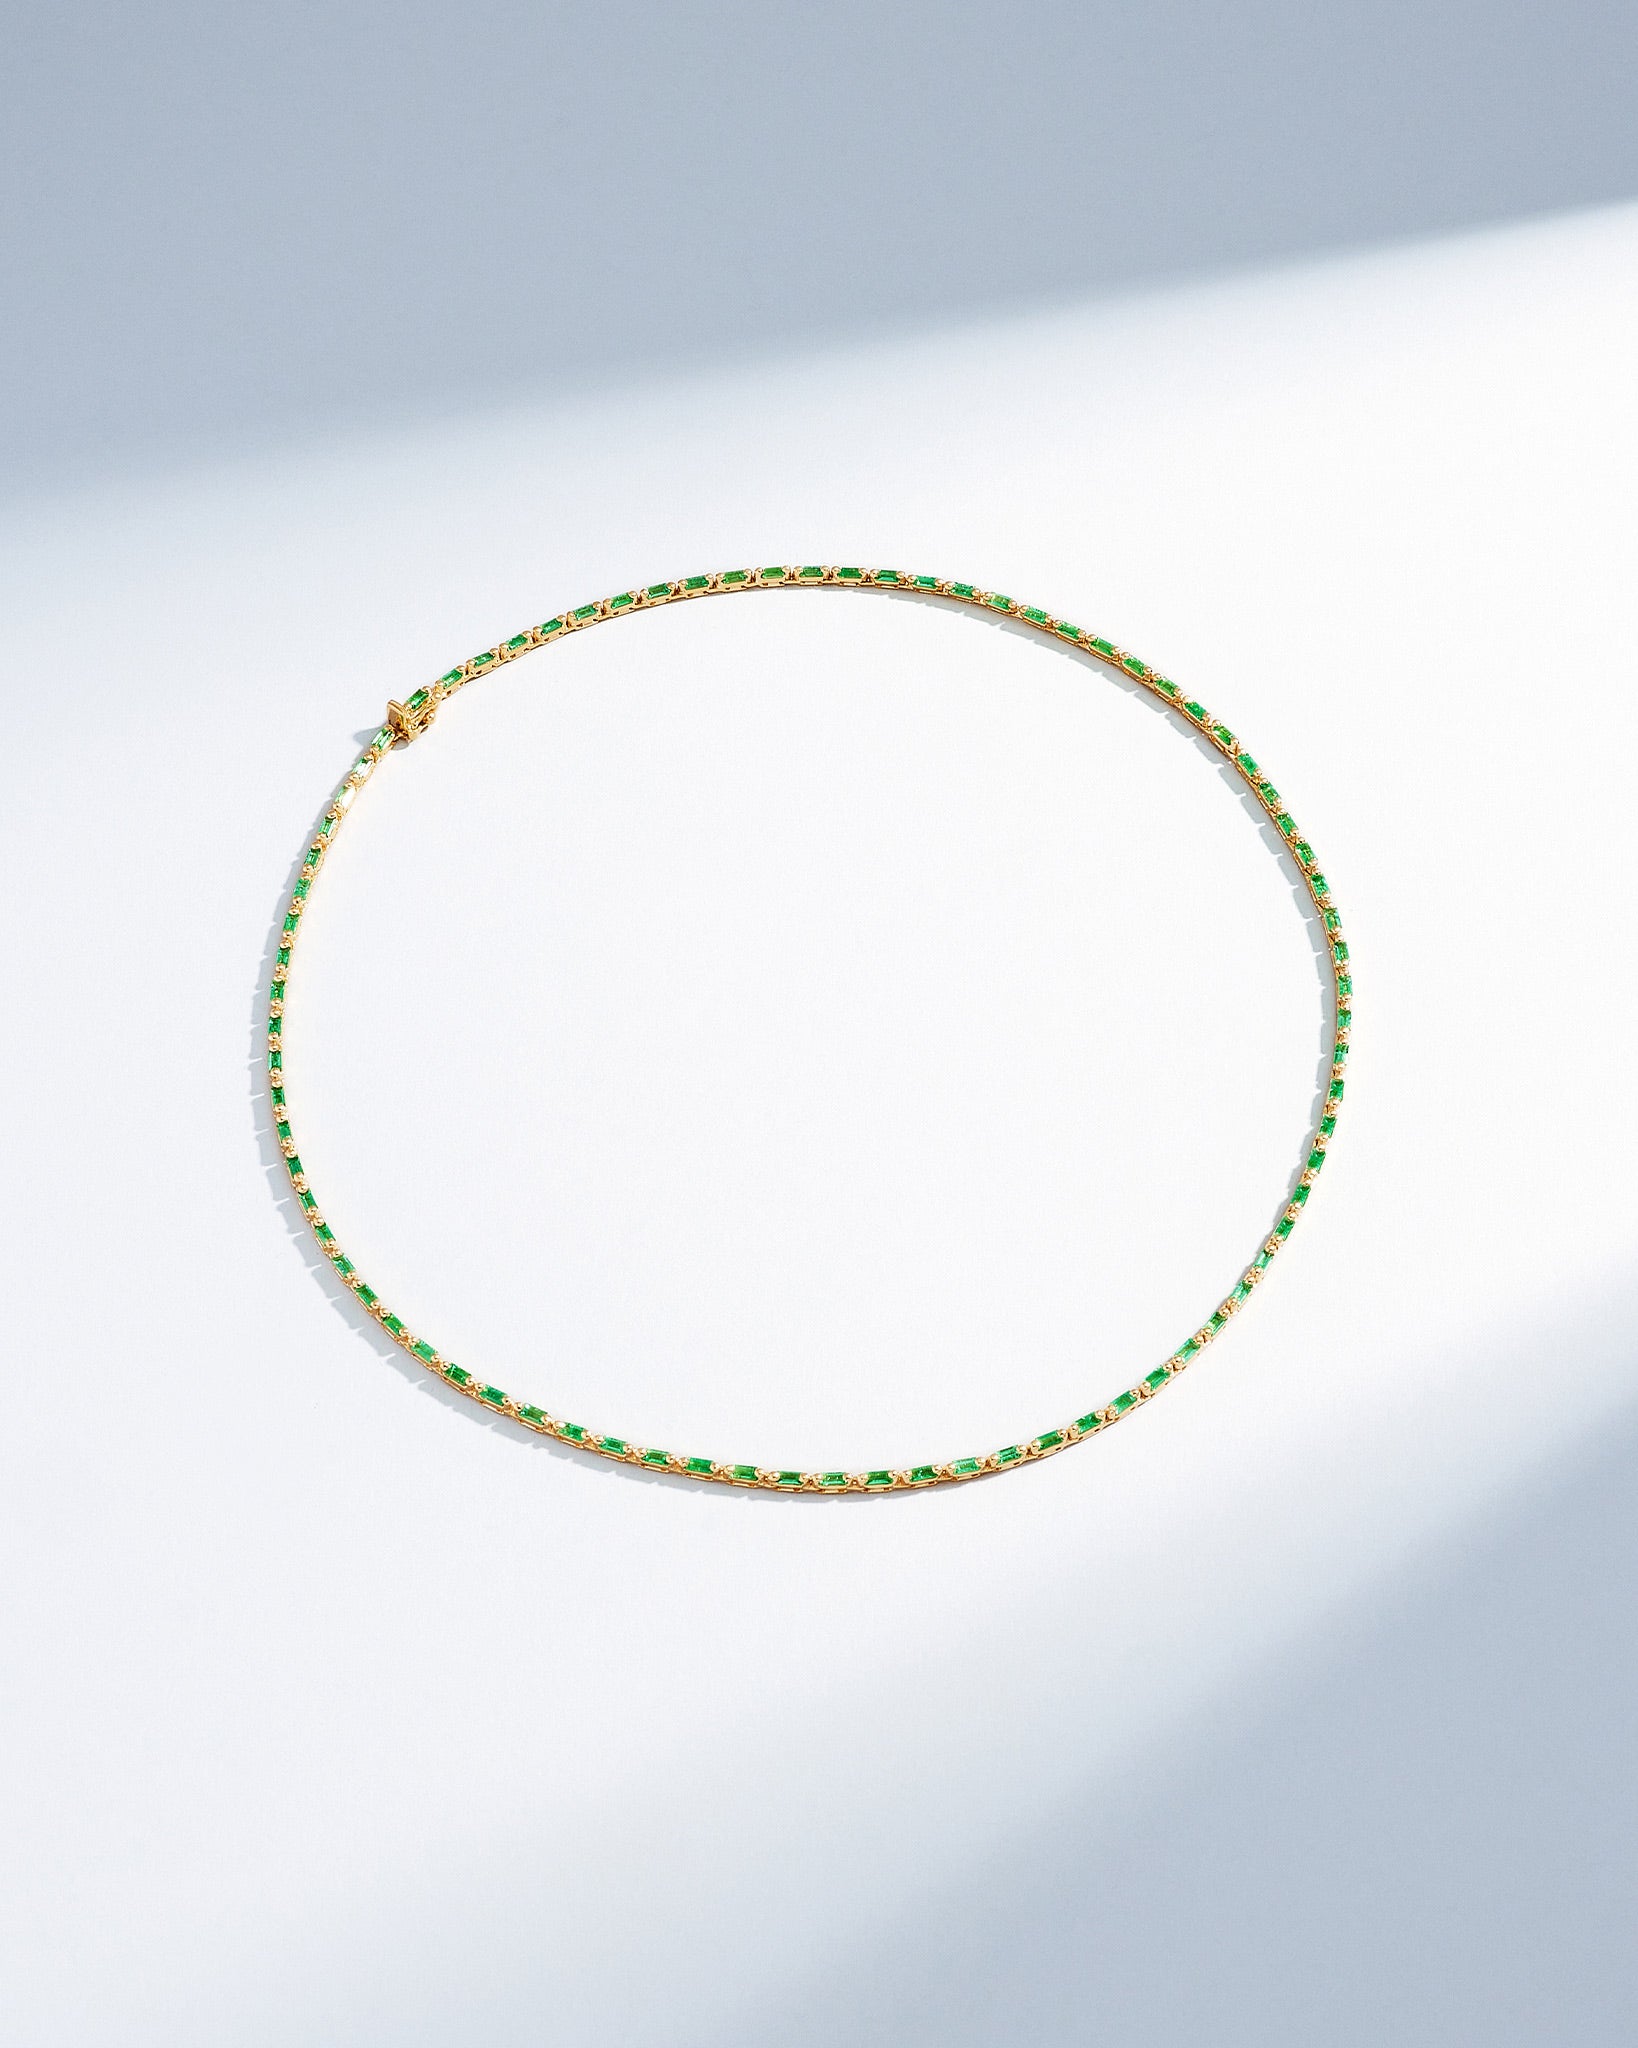 Suzanne Kalan Linear Full Emerald Tennis Necklace in 18k yellow gold